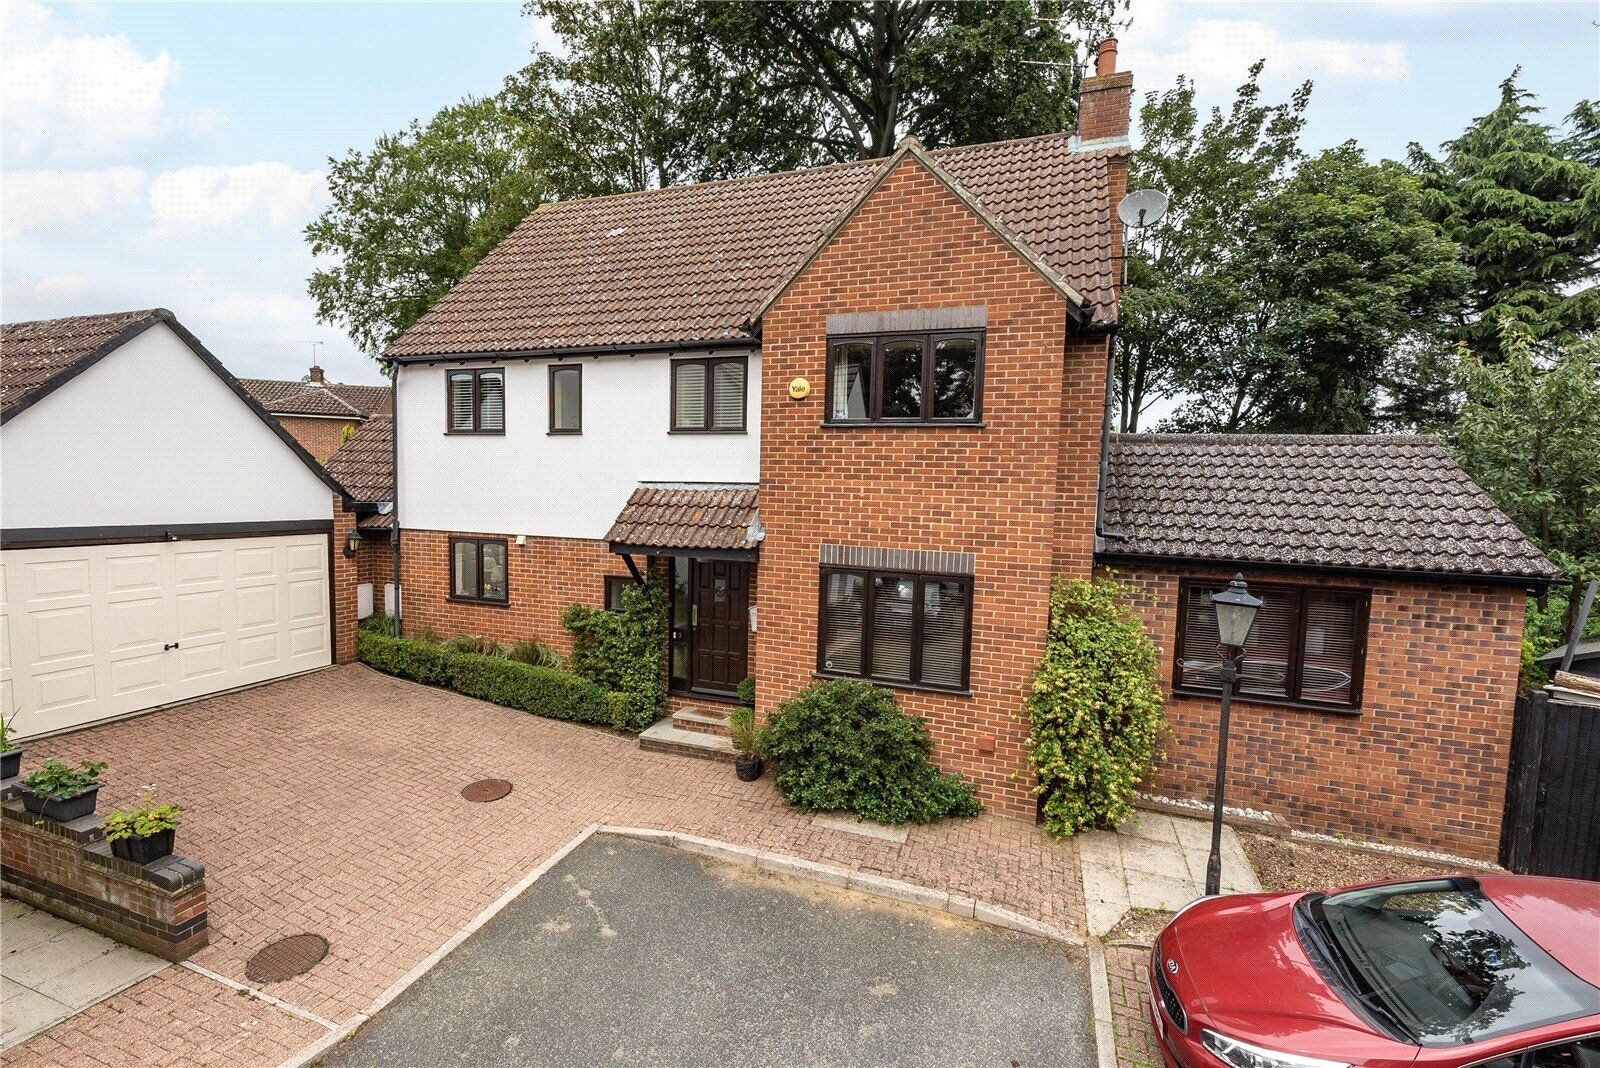 5 bedroom detached house for sale The Rookery, Cambridge Road, CM24, main image